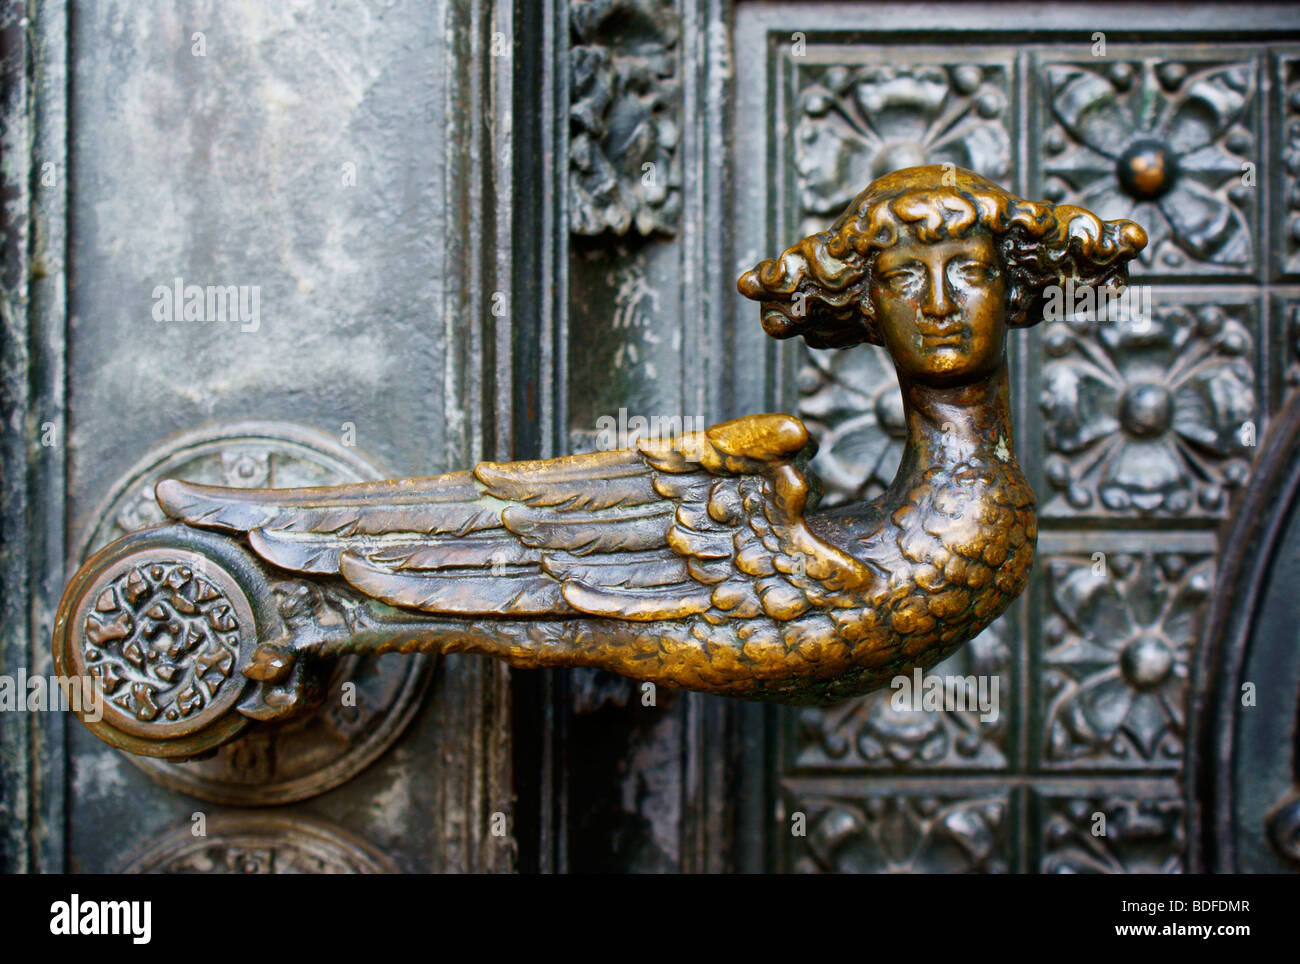 Kölner Dom / Cologne Gothic Cathedral in Germany. Close-up detail of angel door handle. Stock Photo